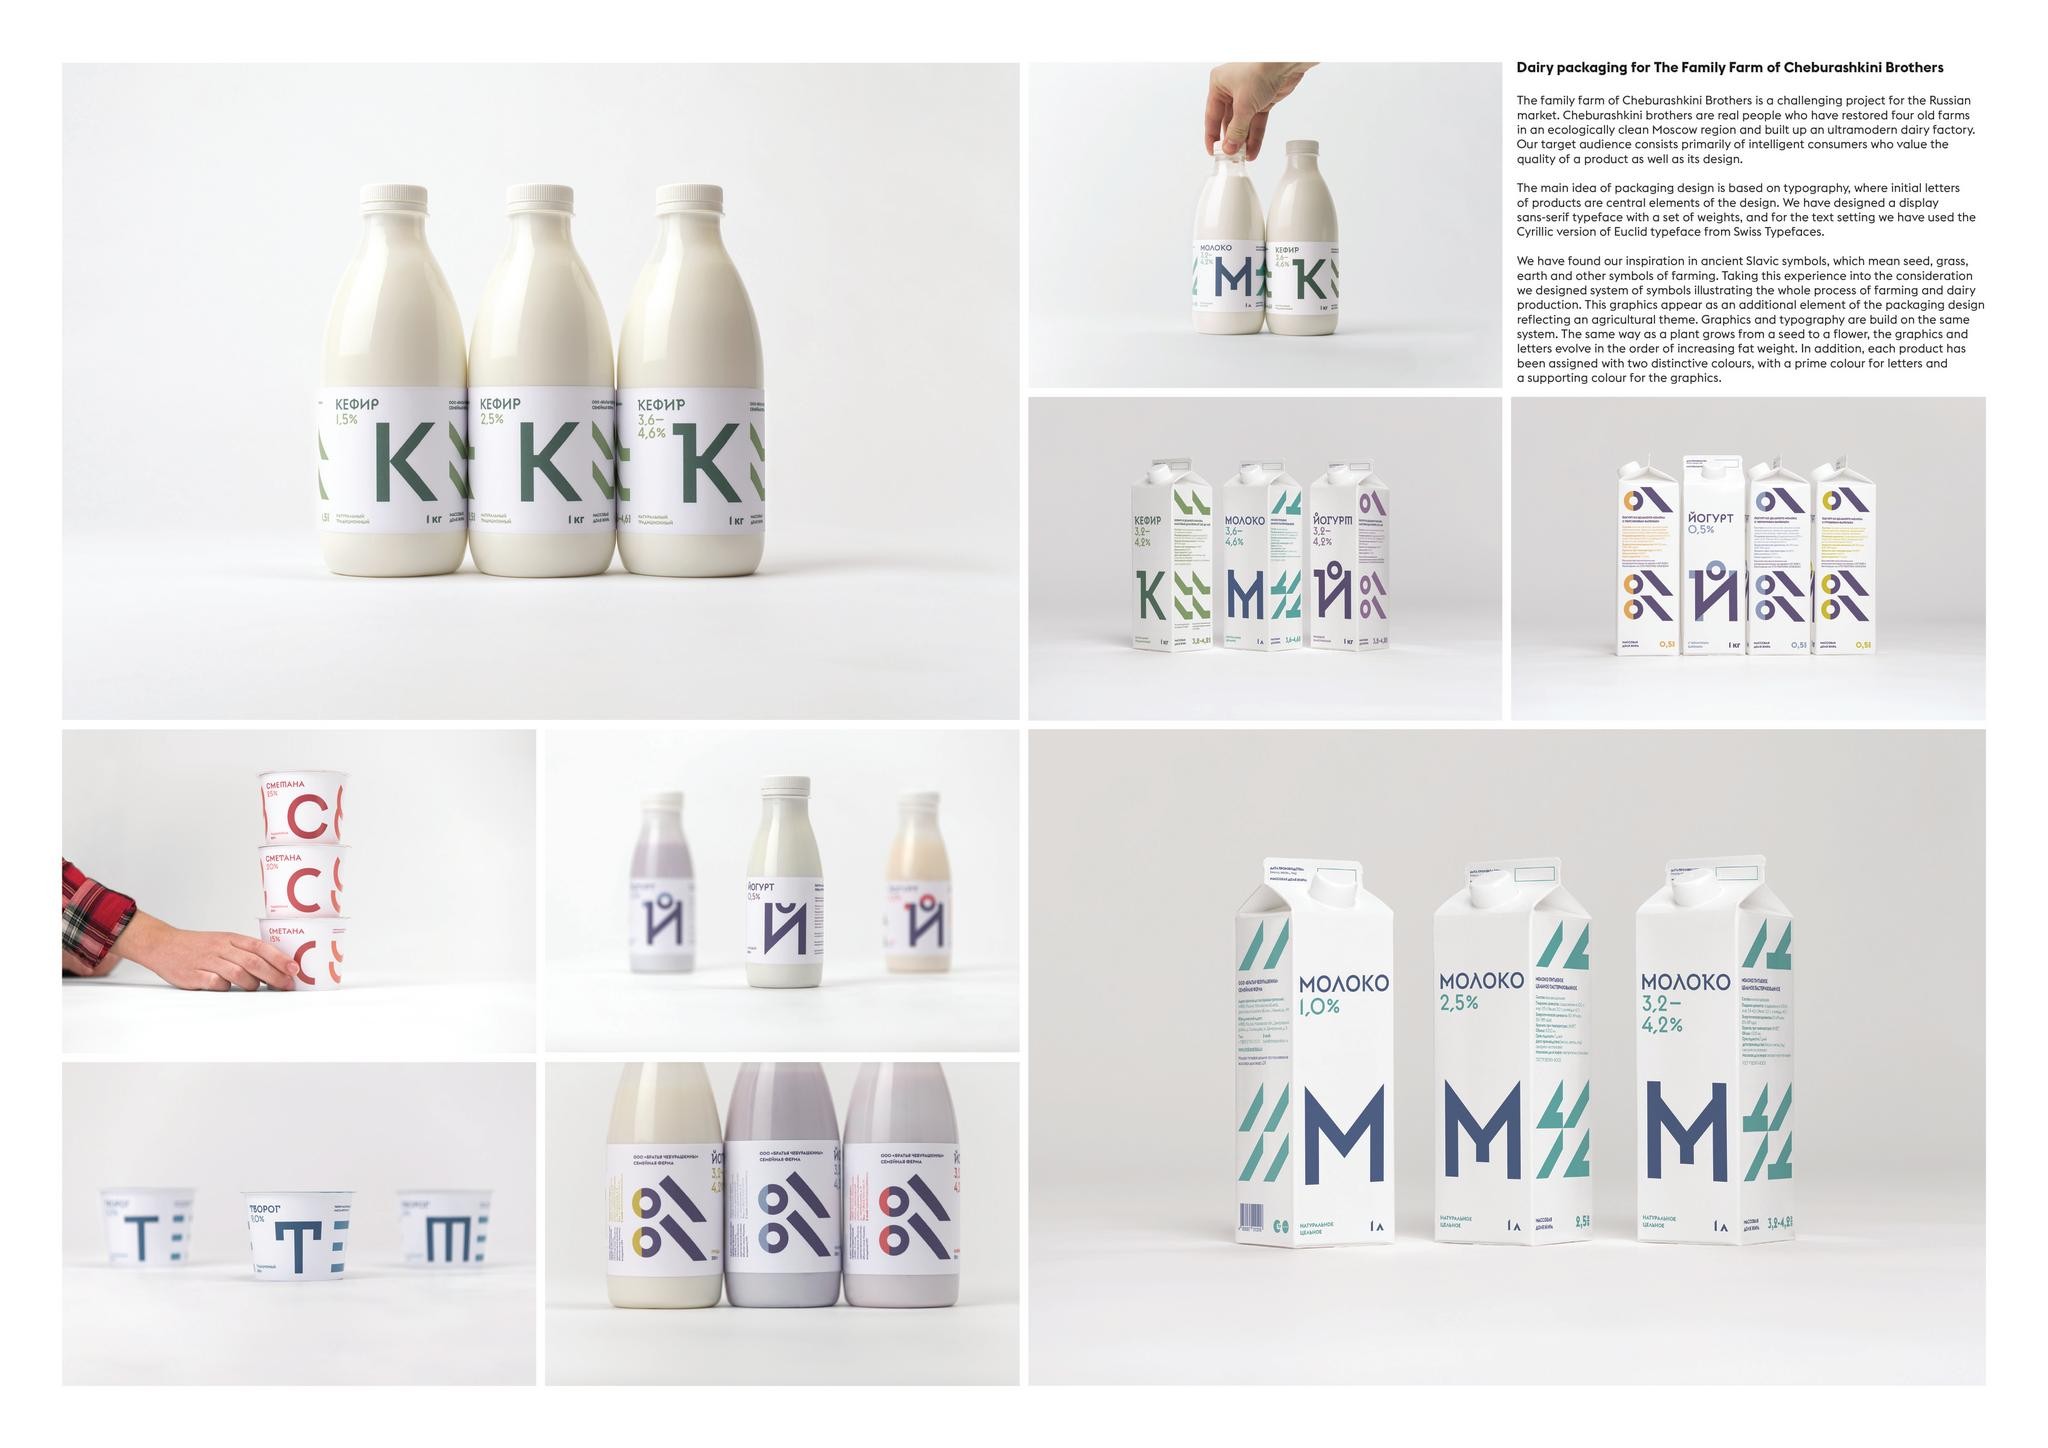 DAIRY PACKAGING FOR THE FAMILY FARM OF CHEBURASHKINI BROTHERS